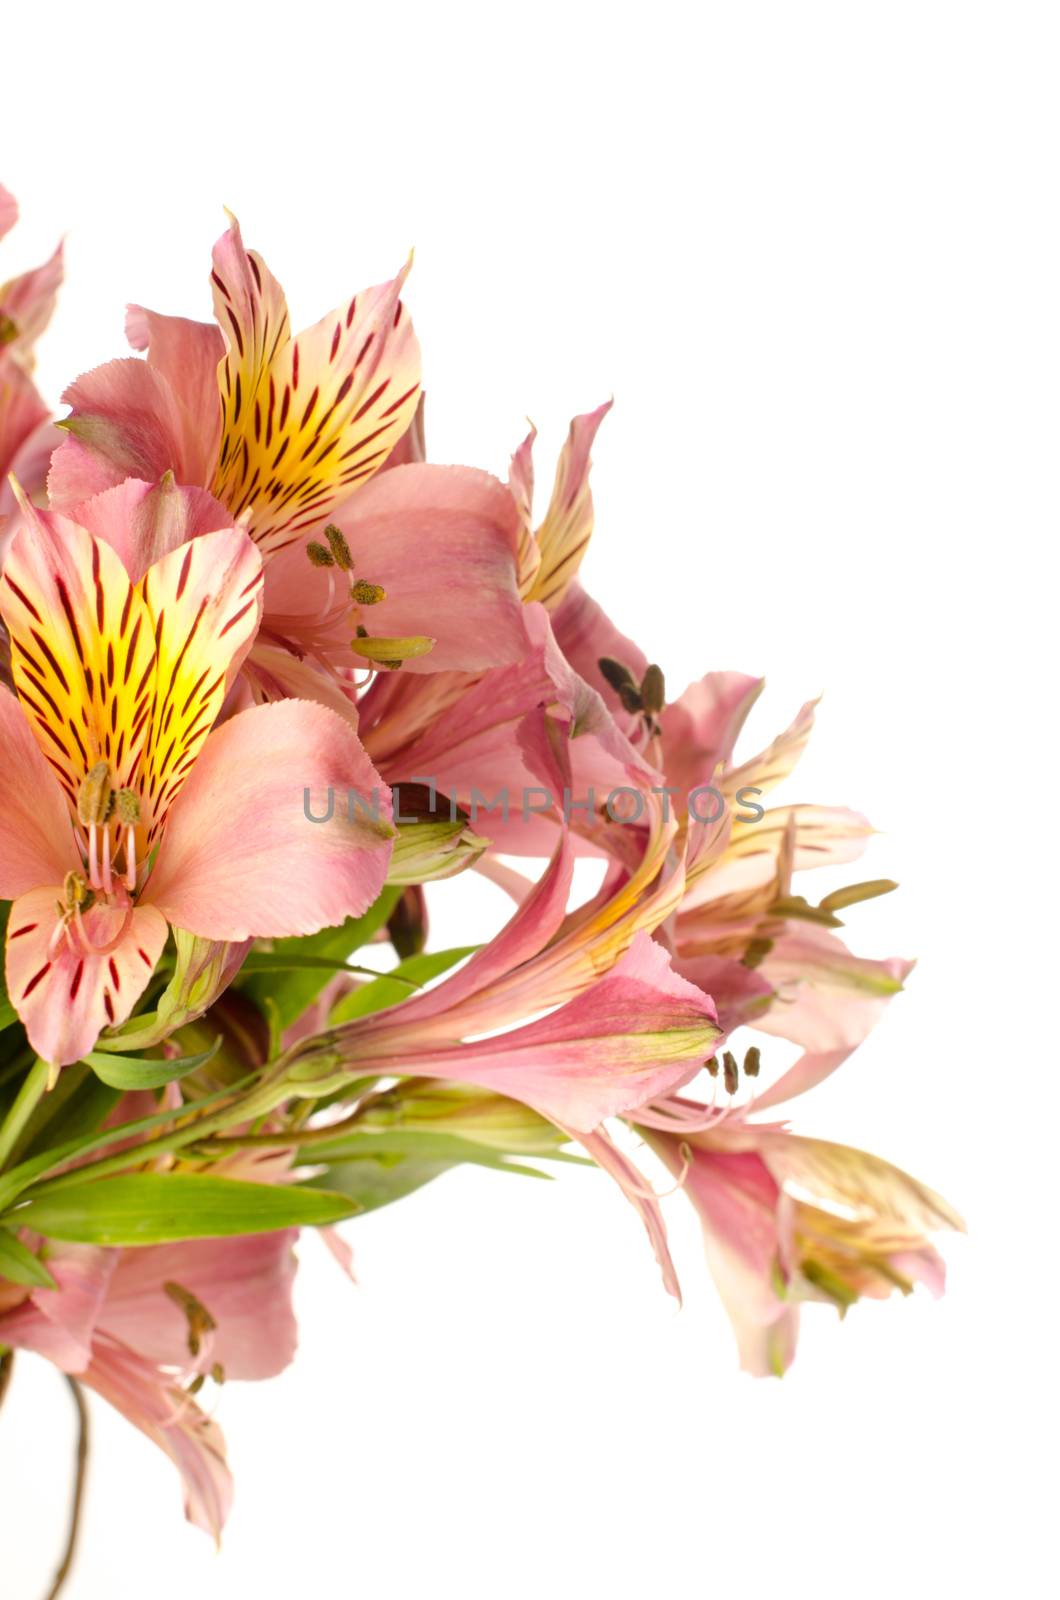 Alstroemeria flowers isolated on white background by AnaMarques